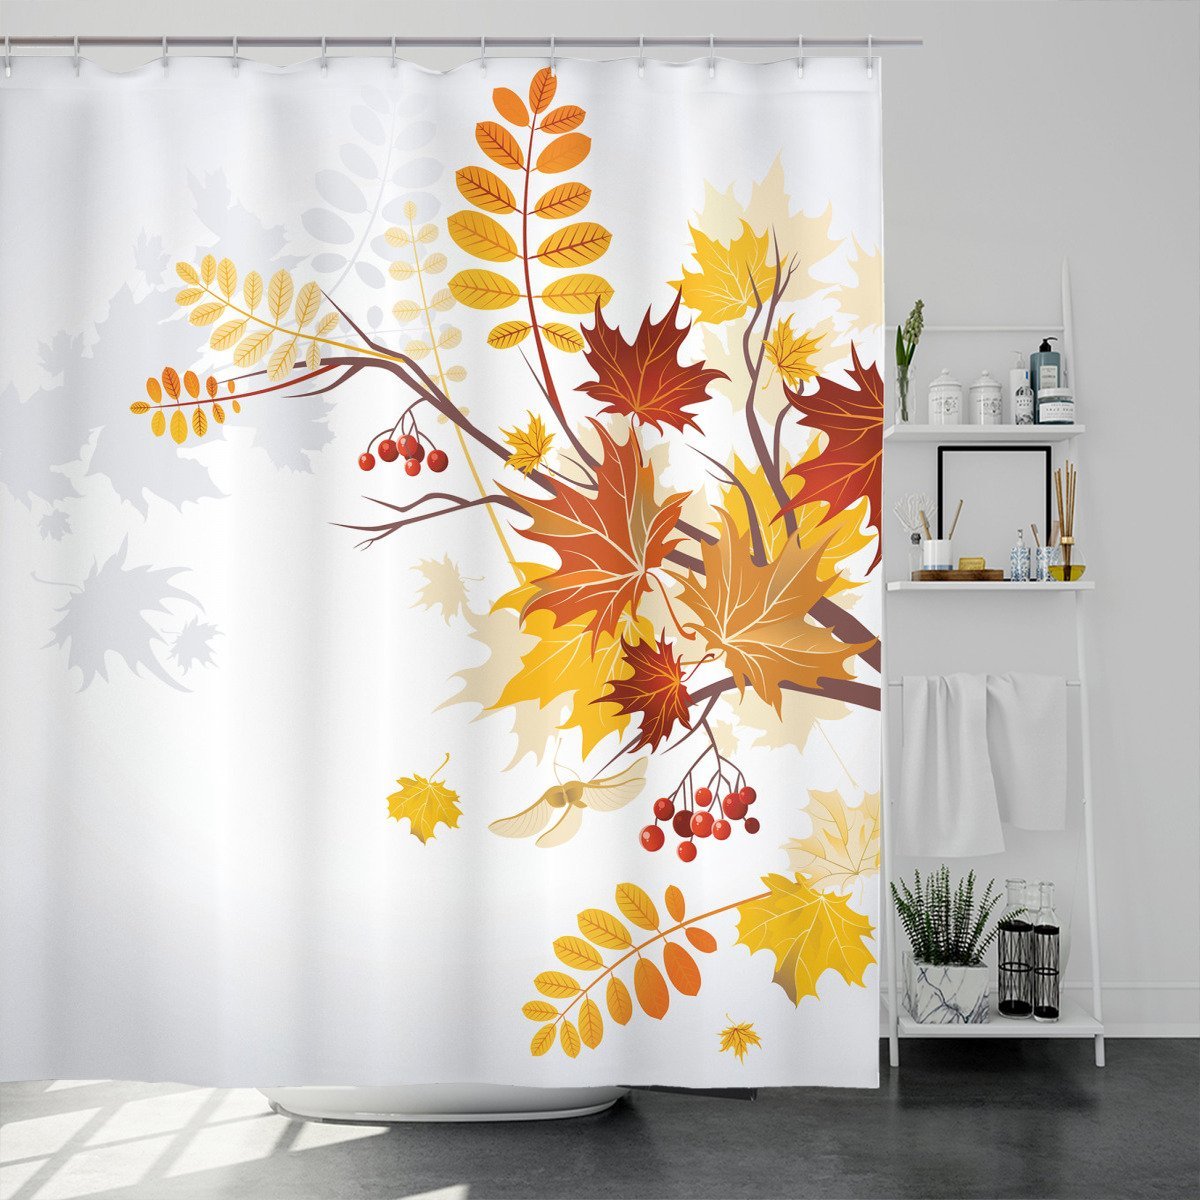 Autumn Themed Faded Leaves Shower Curtain - Shower Curtains